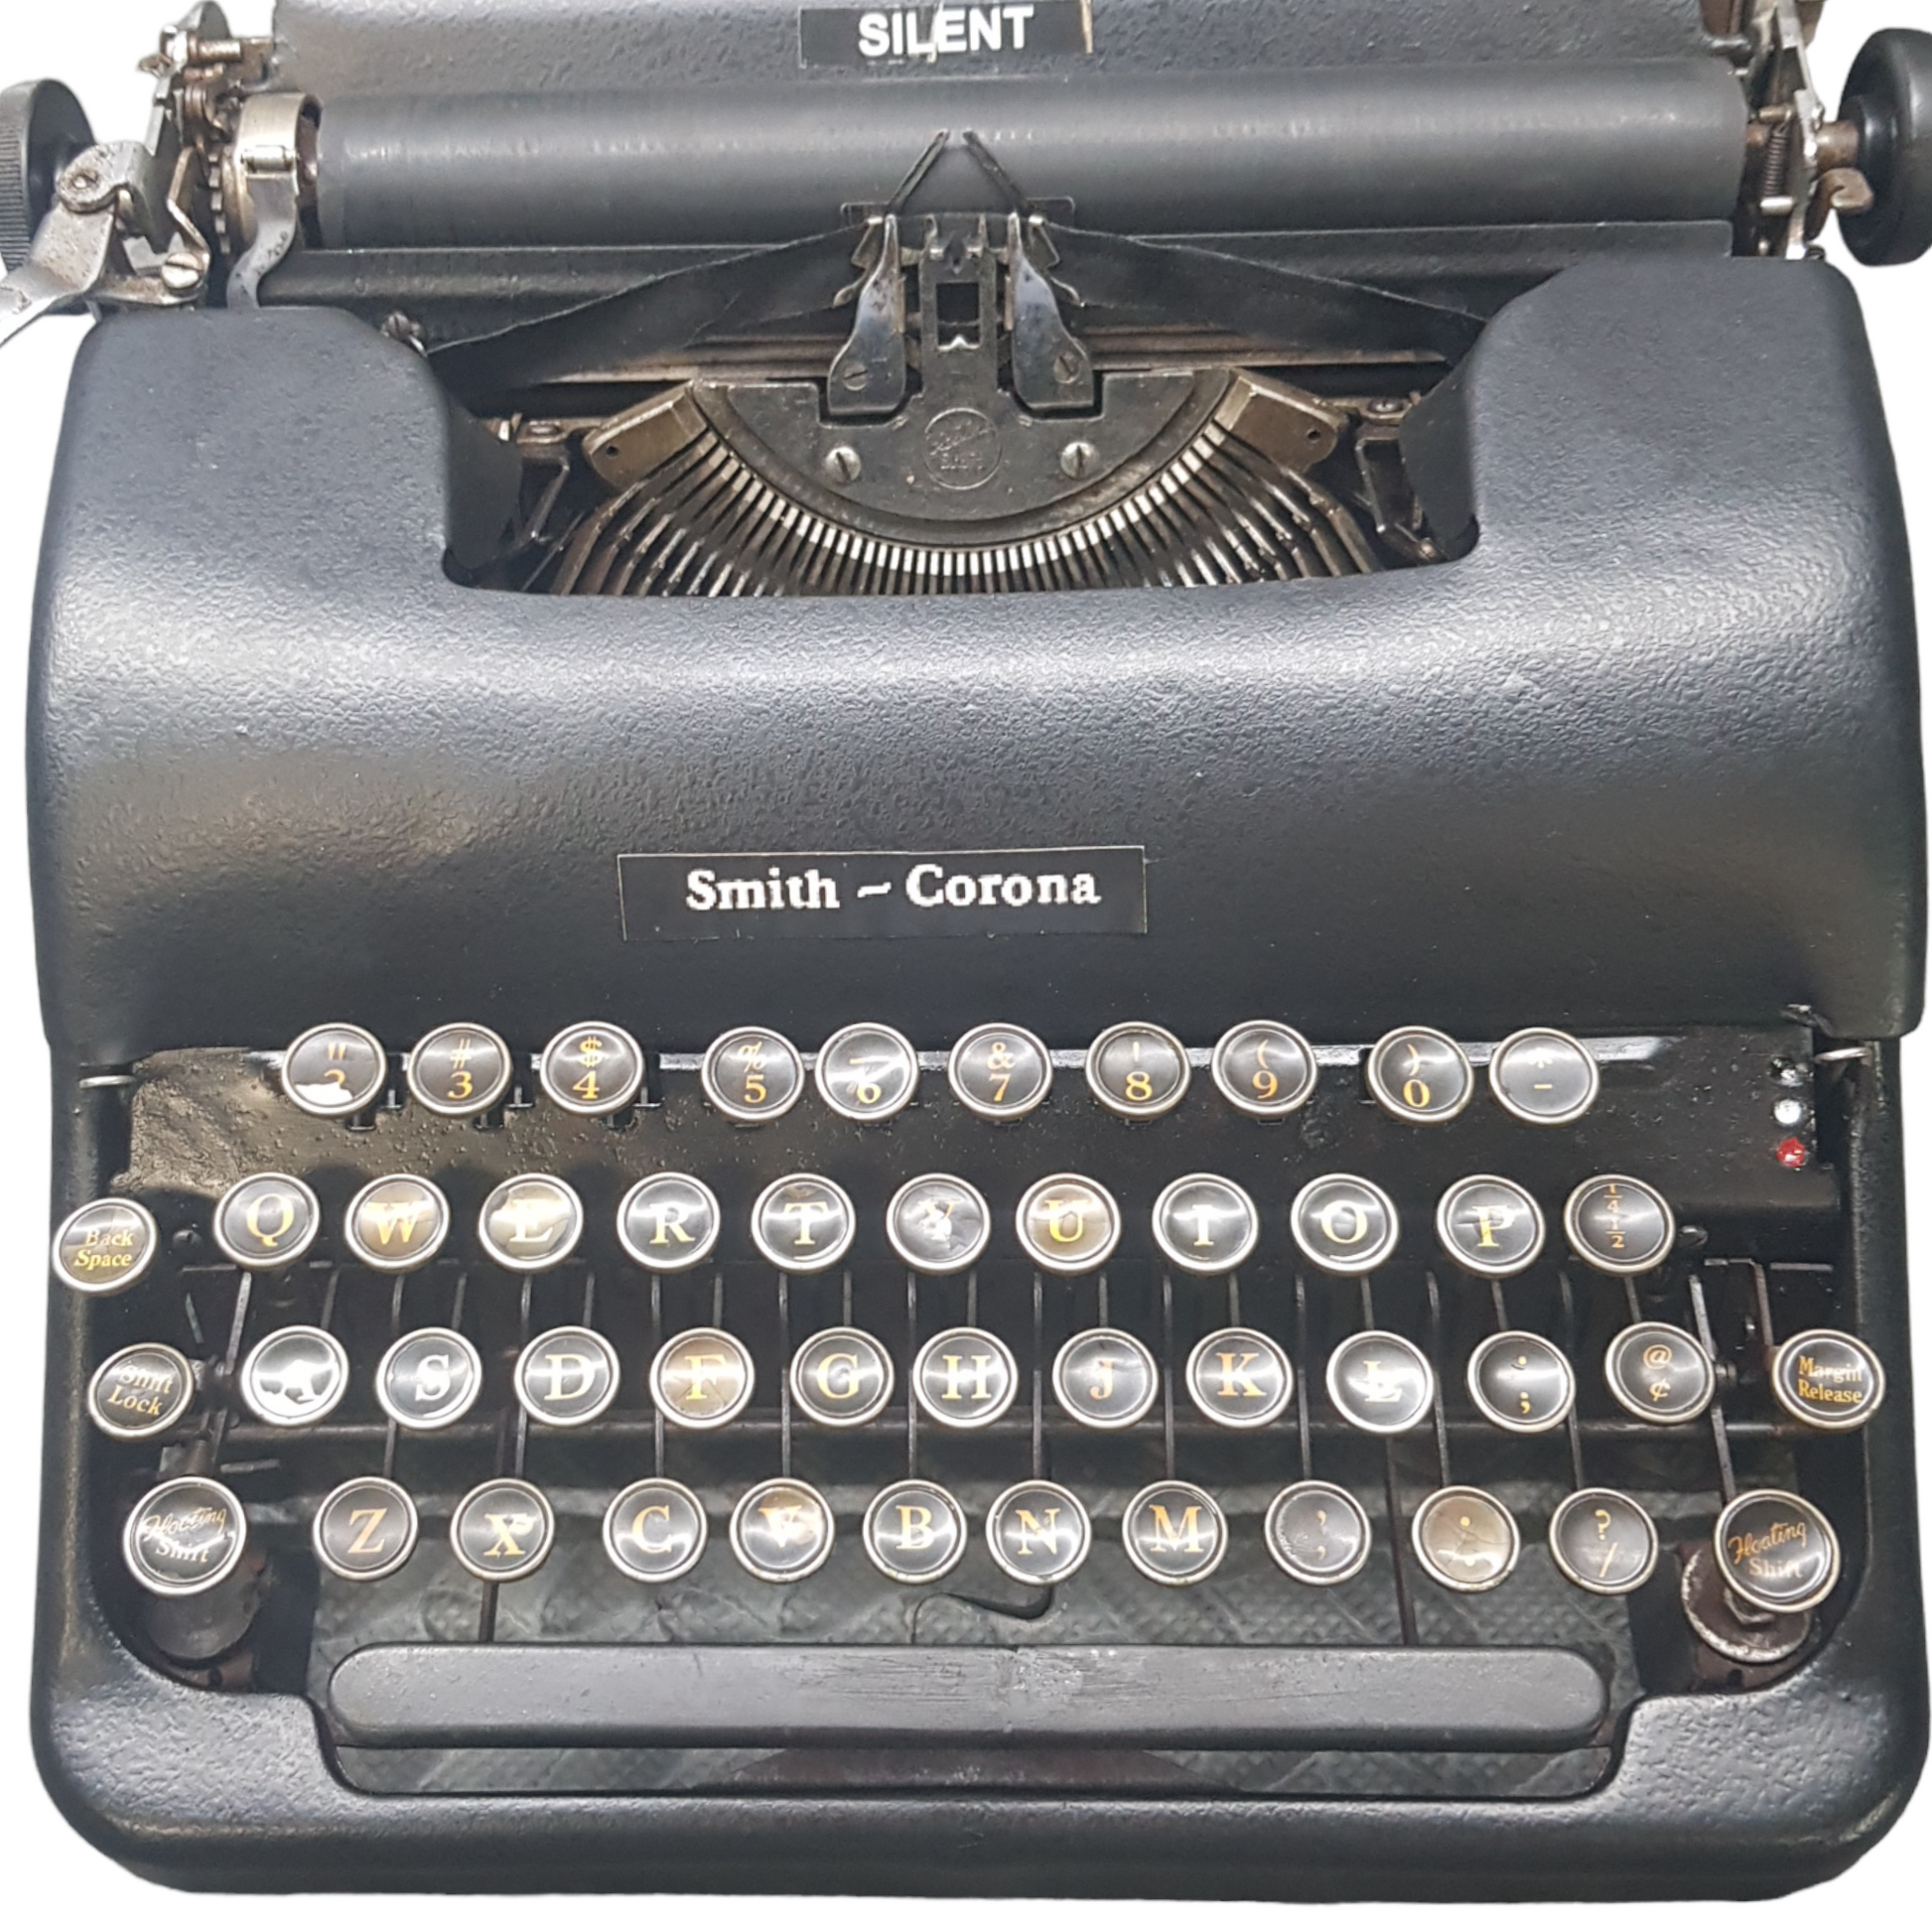 Image of Smith Corona Silent Vintage Typewriter. A Classic Vintage Mid size typewriter. Made in the USA. Available from Universal Typewriter Company.